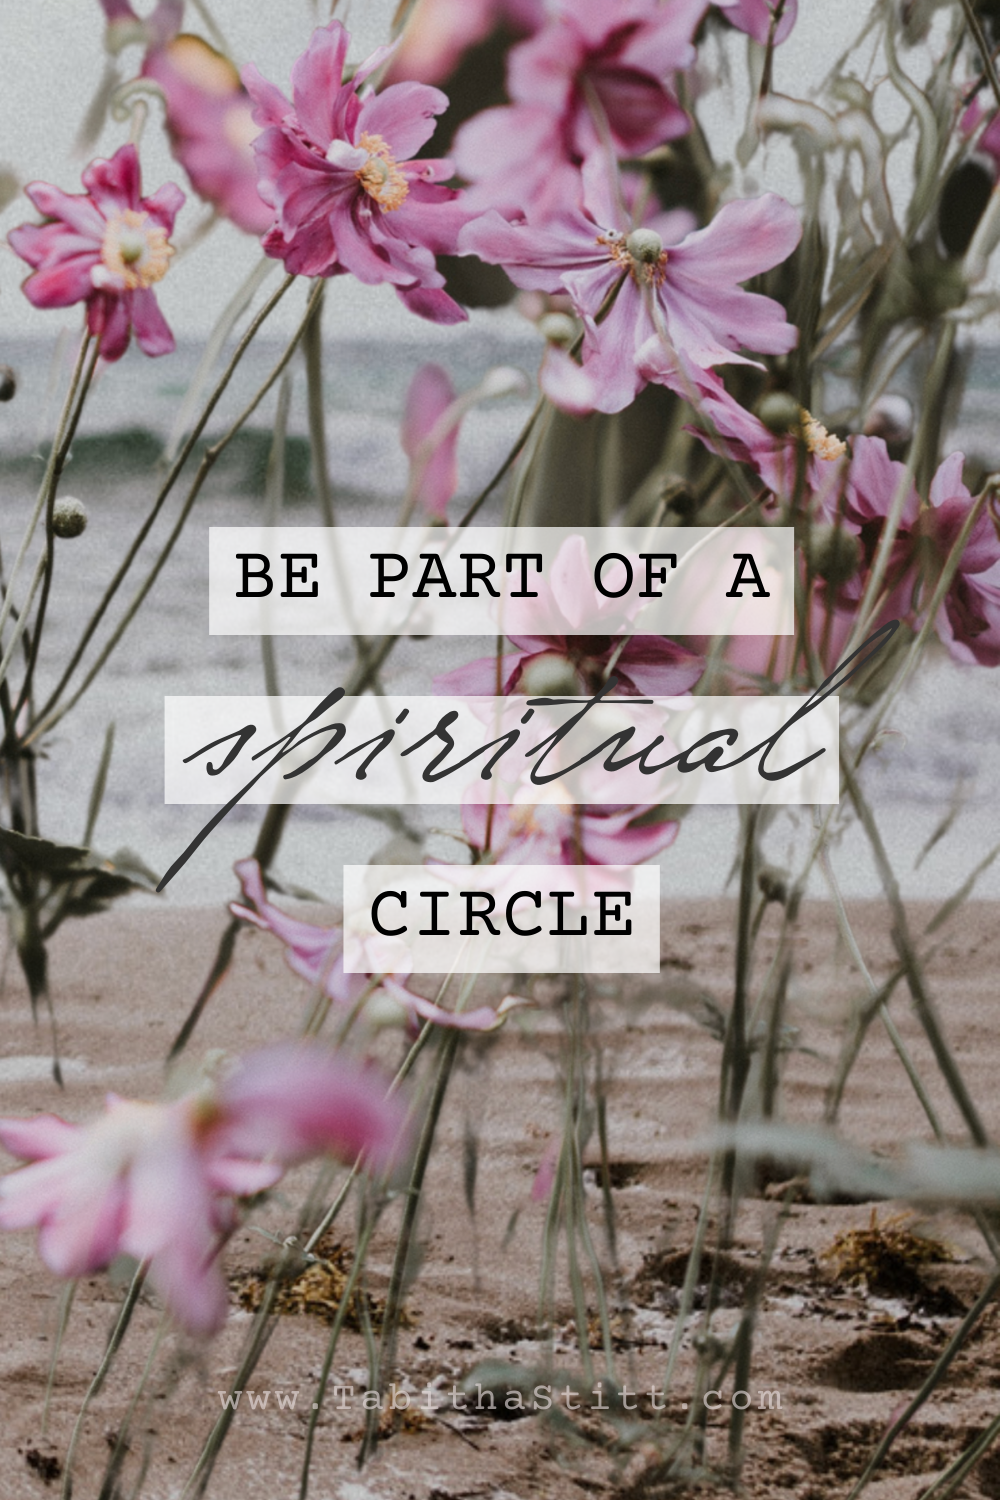 10 Ways to Know If You're on Your Spiritual Path - Be part of a Spiritual Circle - with Lots of Flowers to Symbolize Community